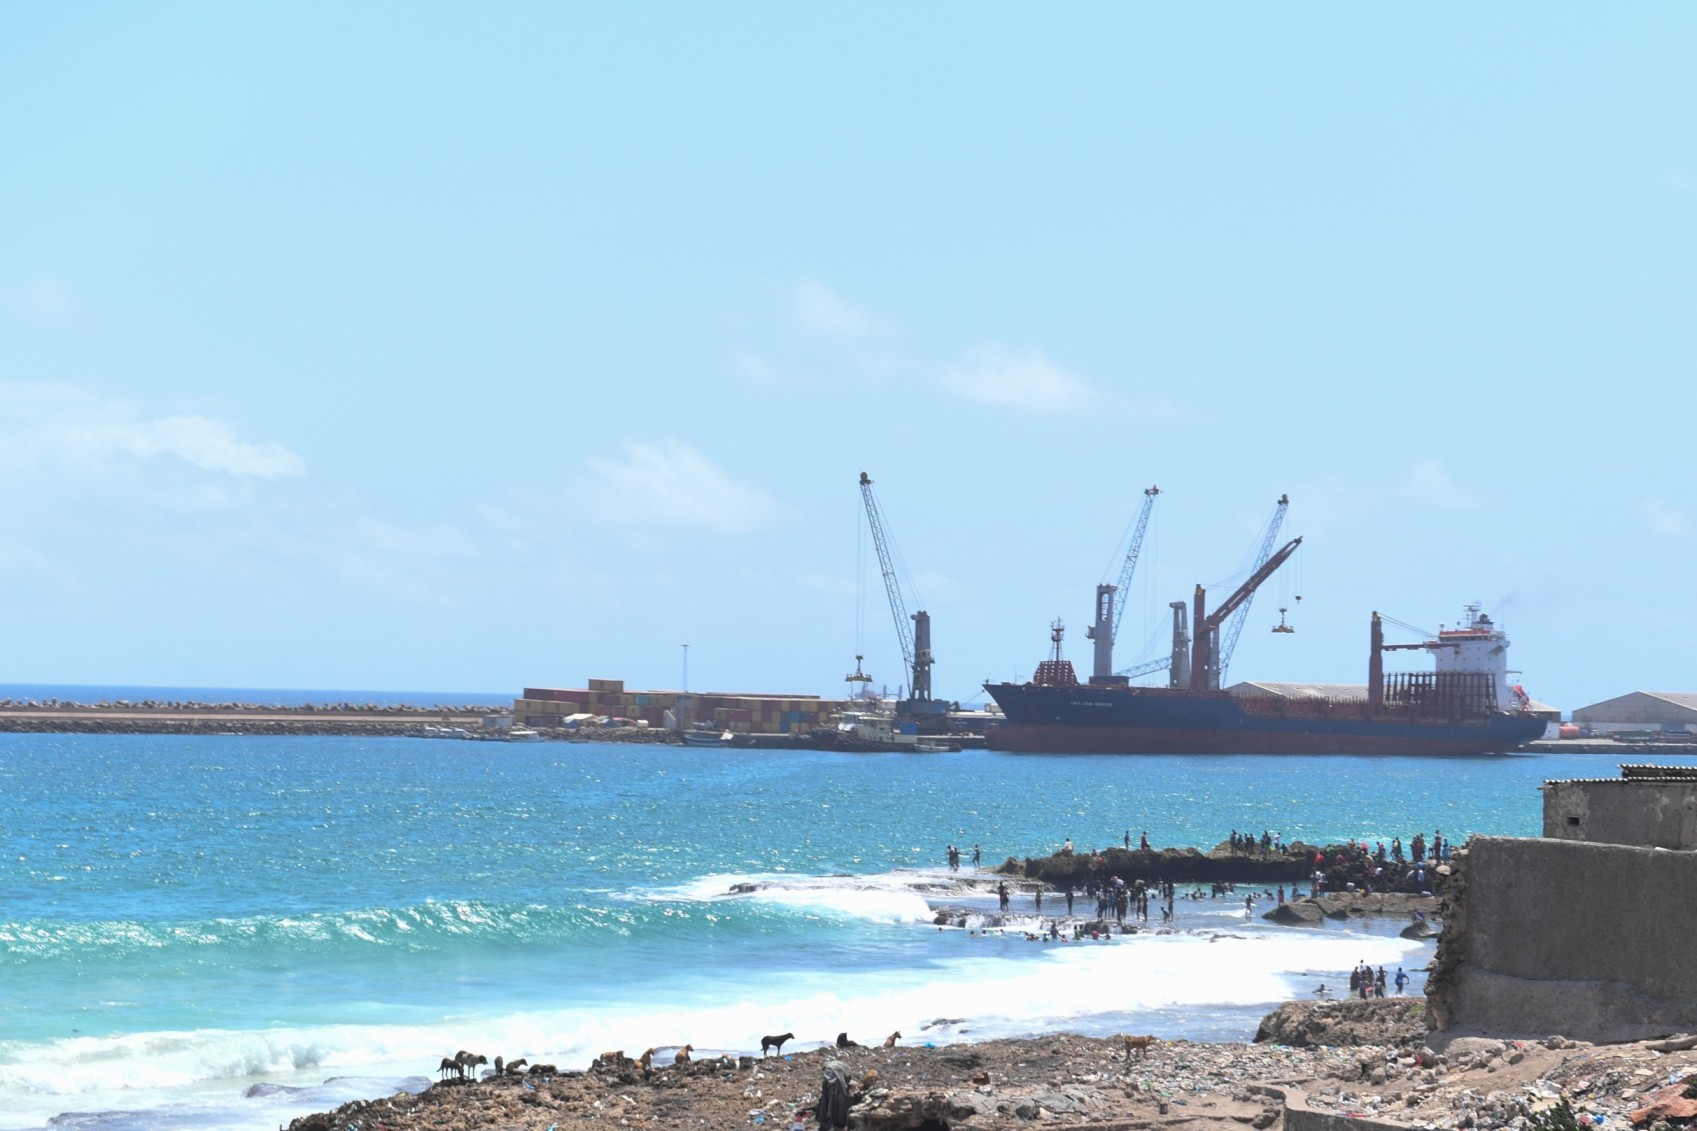 Piracy, armed robbery incidents rise off the coast of Somalia